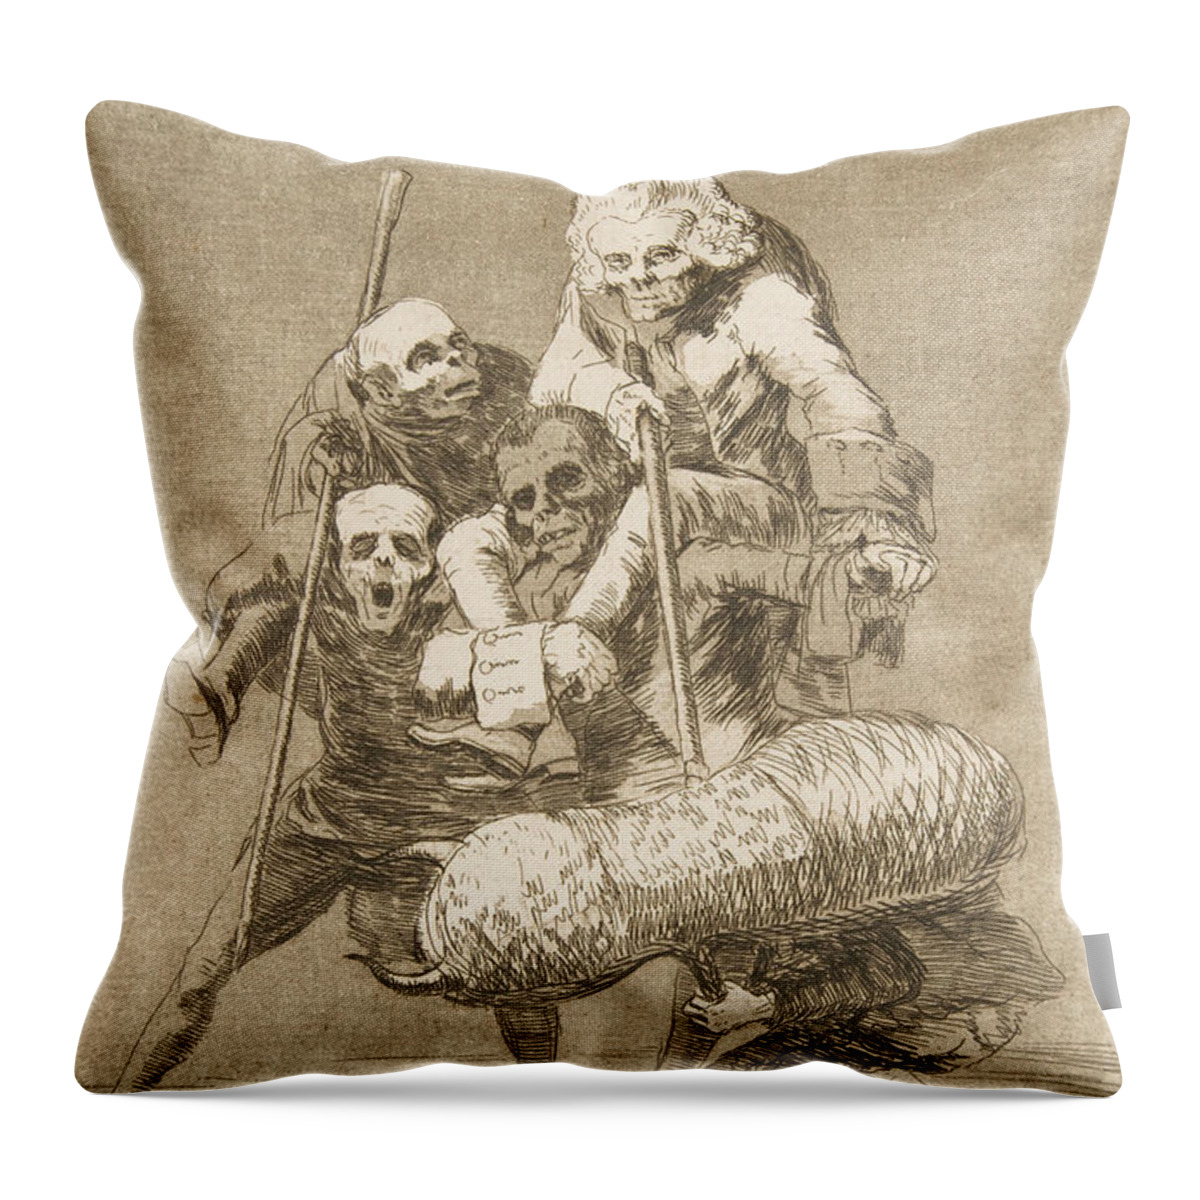 Spanish Art Throw Pillow featuring the relief What one does to another by Francisco Goya